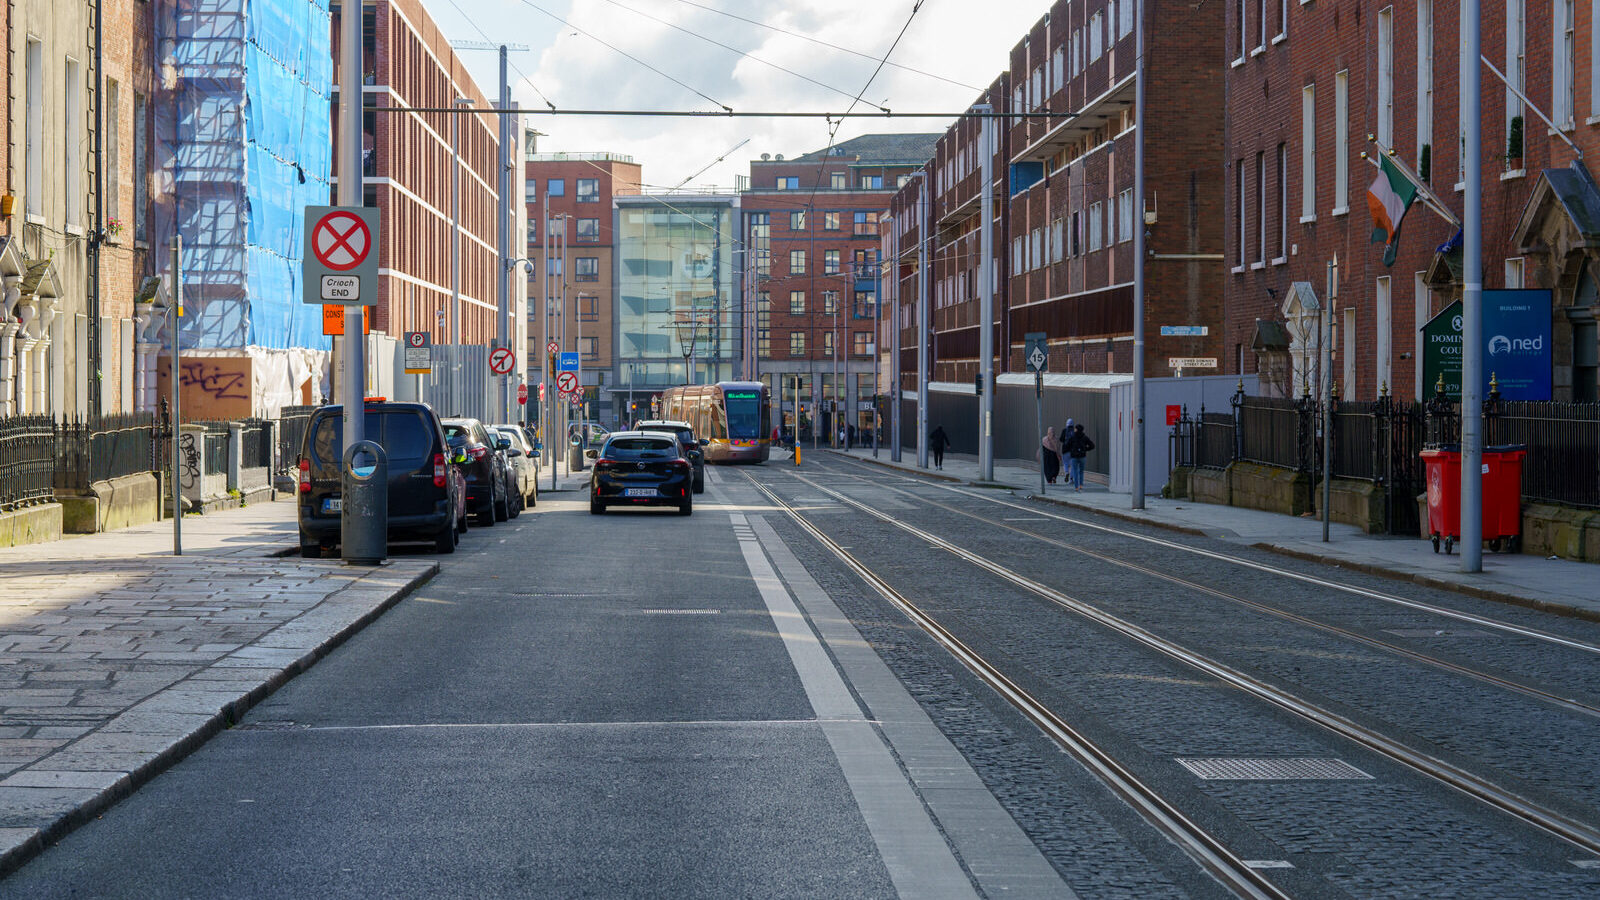 LUAS TRAM STOP AT LOWER DOMINICK STREET [AT THE MOMENT THE AREA DOES FEEL SAFER]-228675-1